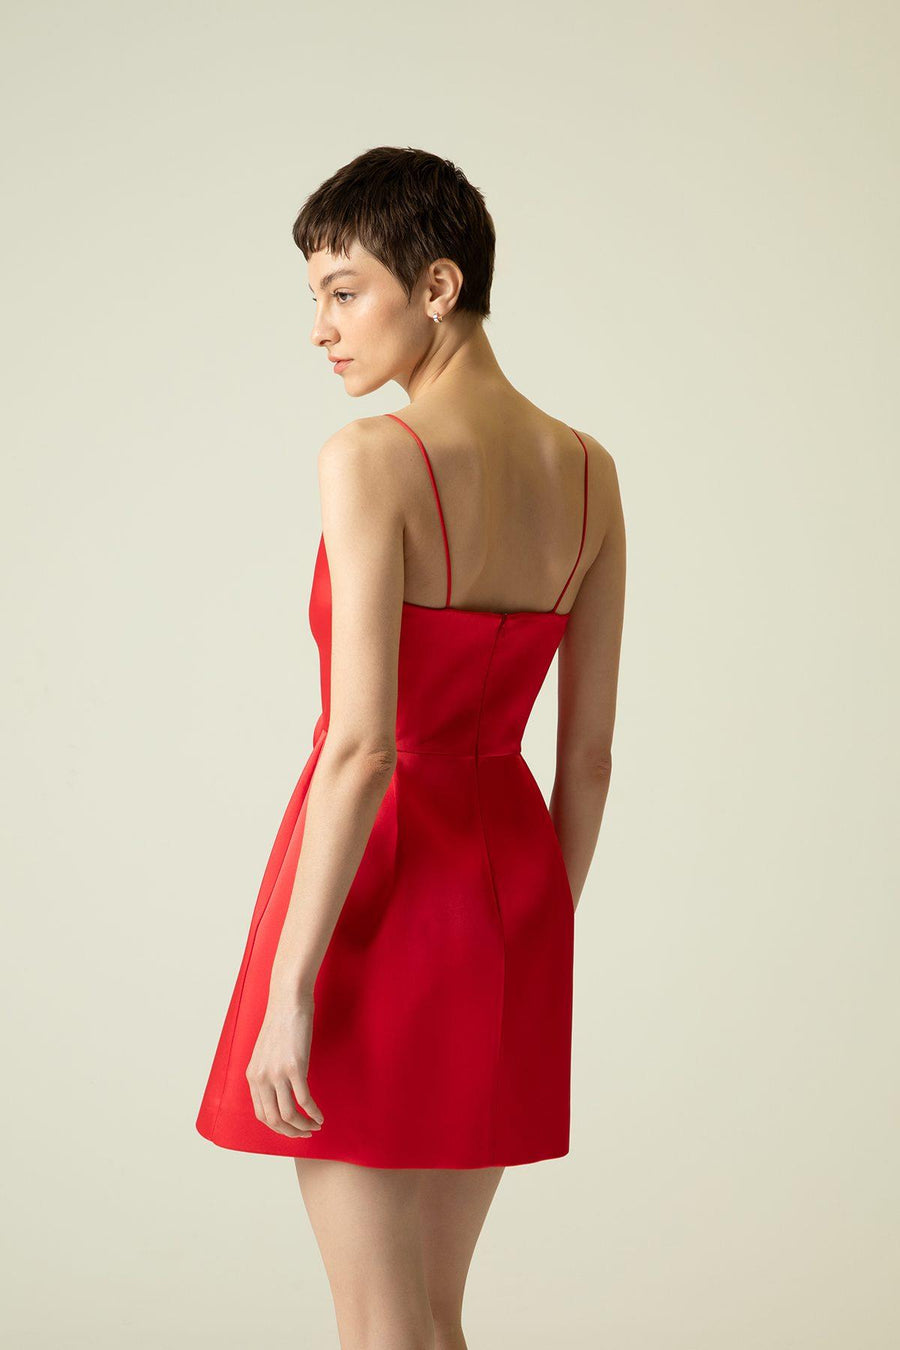 RUE Les Createurs Bow Detailed Red Mini Dress with Thin Straps - Porterist 3